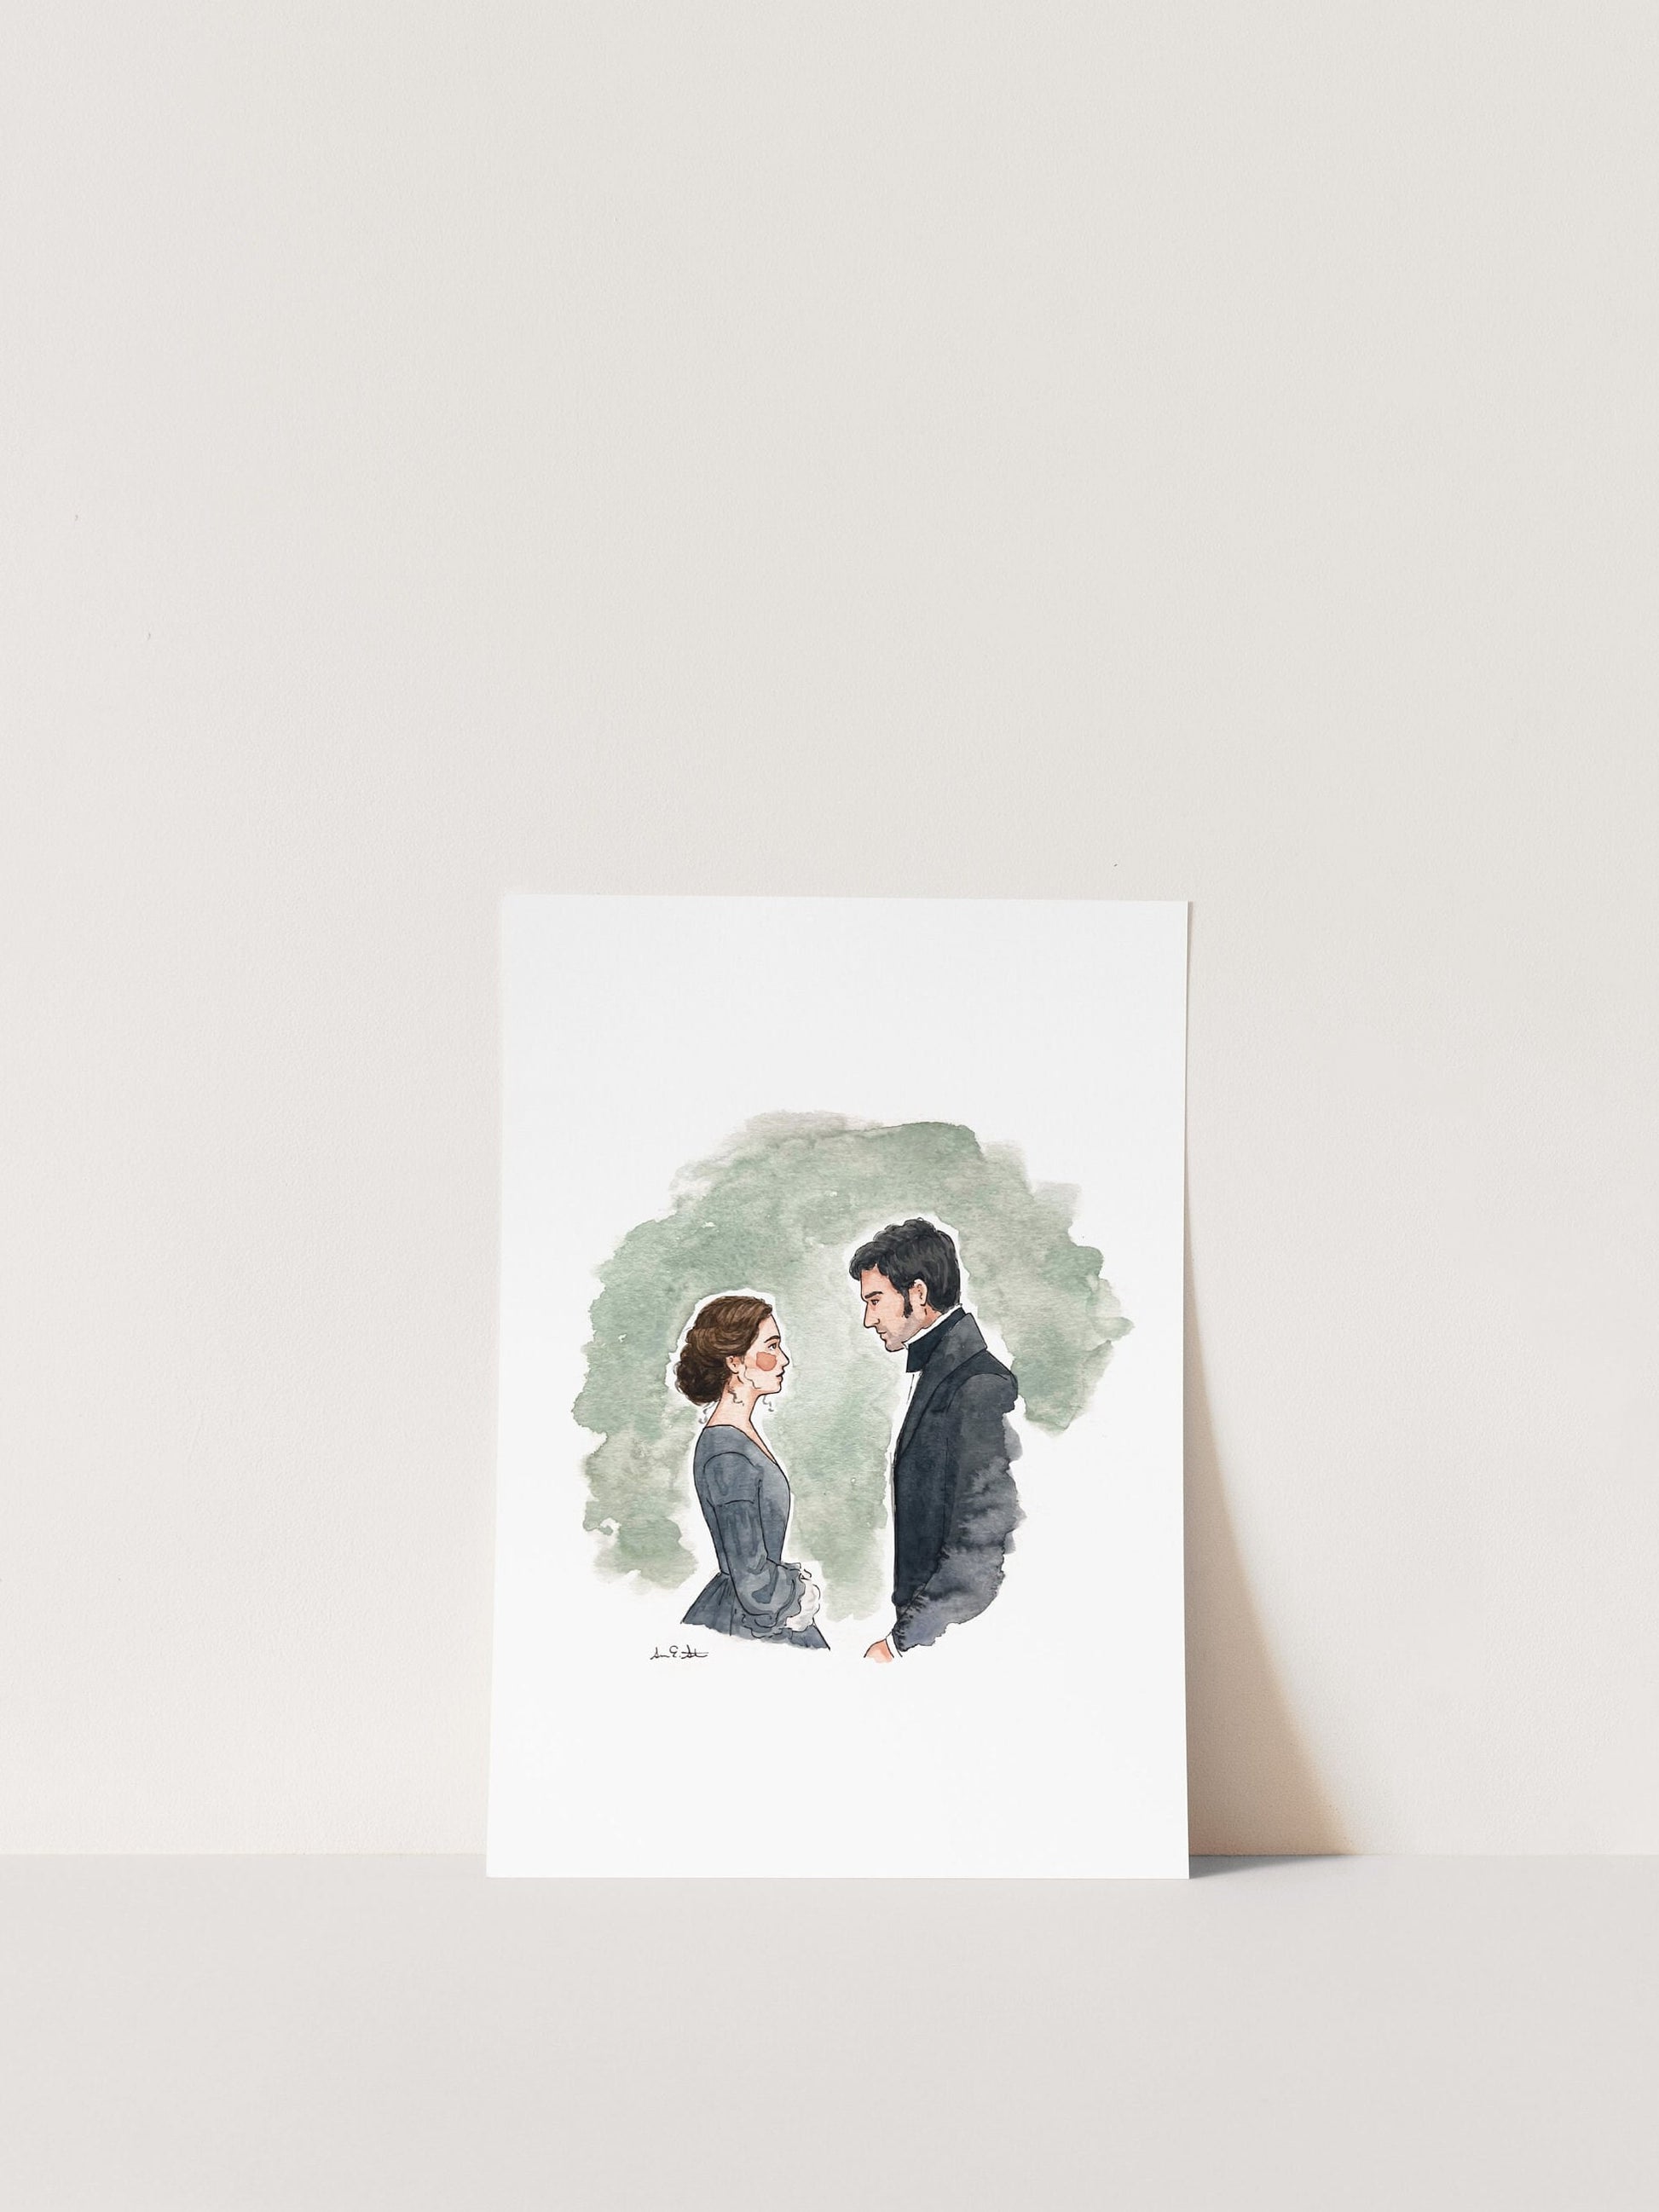 North & South Movie Print | Watercolor Illustration | Wall Art | 8x10" 5x7" Archival Art Print | Book Lover Gift | Elizabeth Gaskell